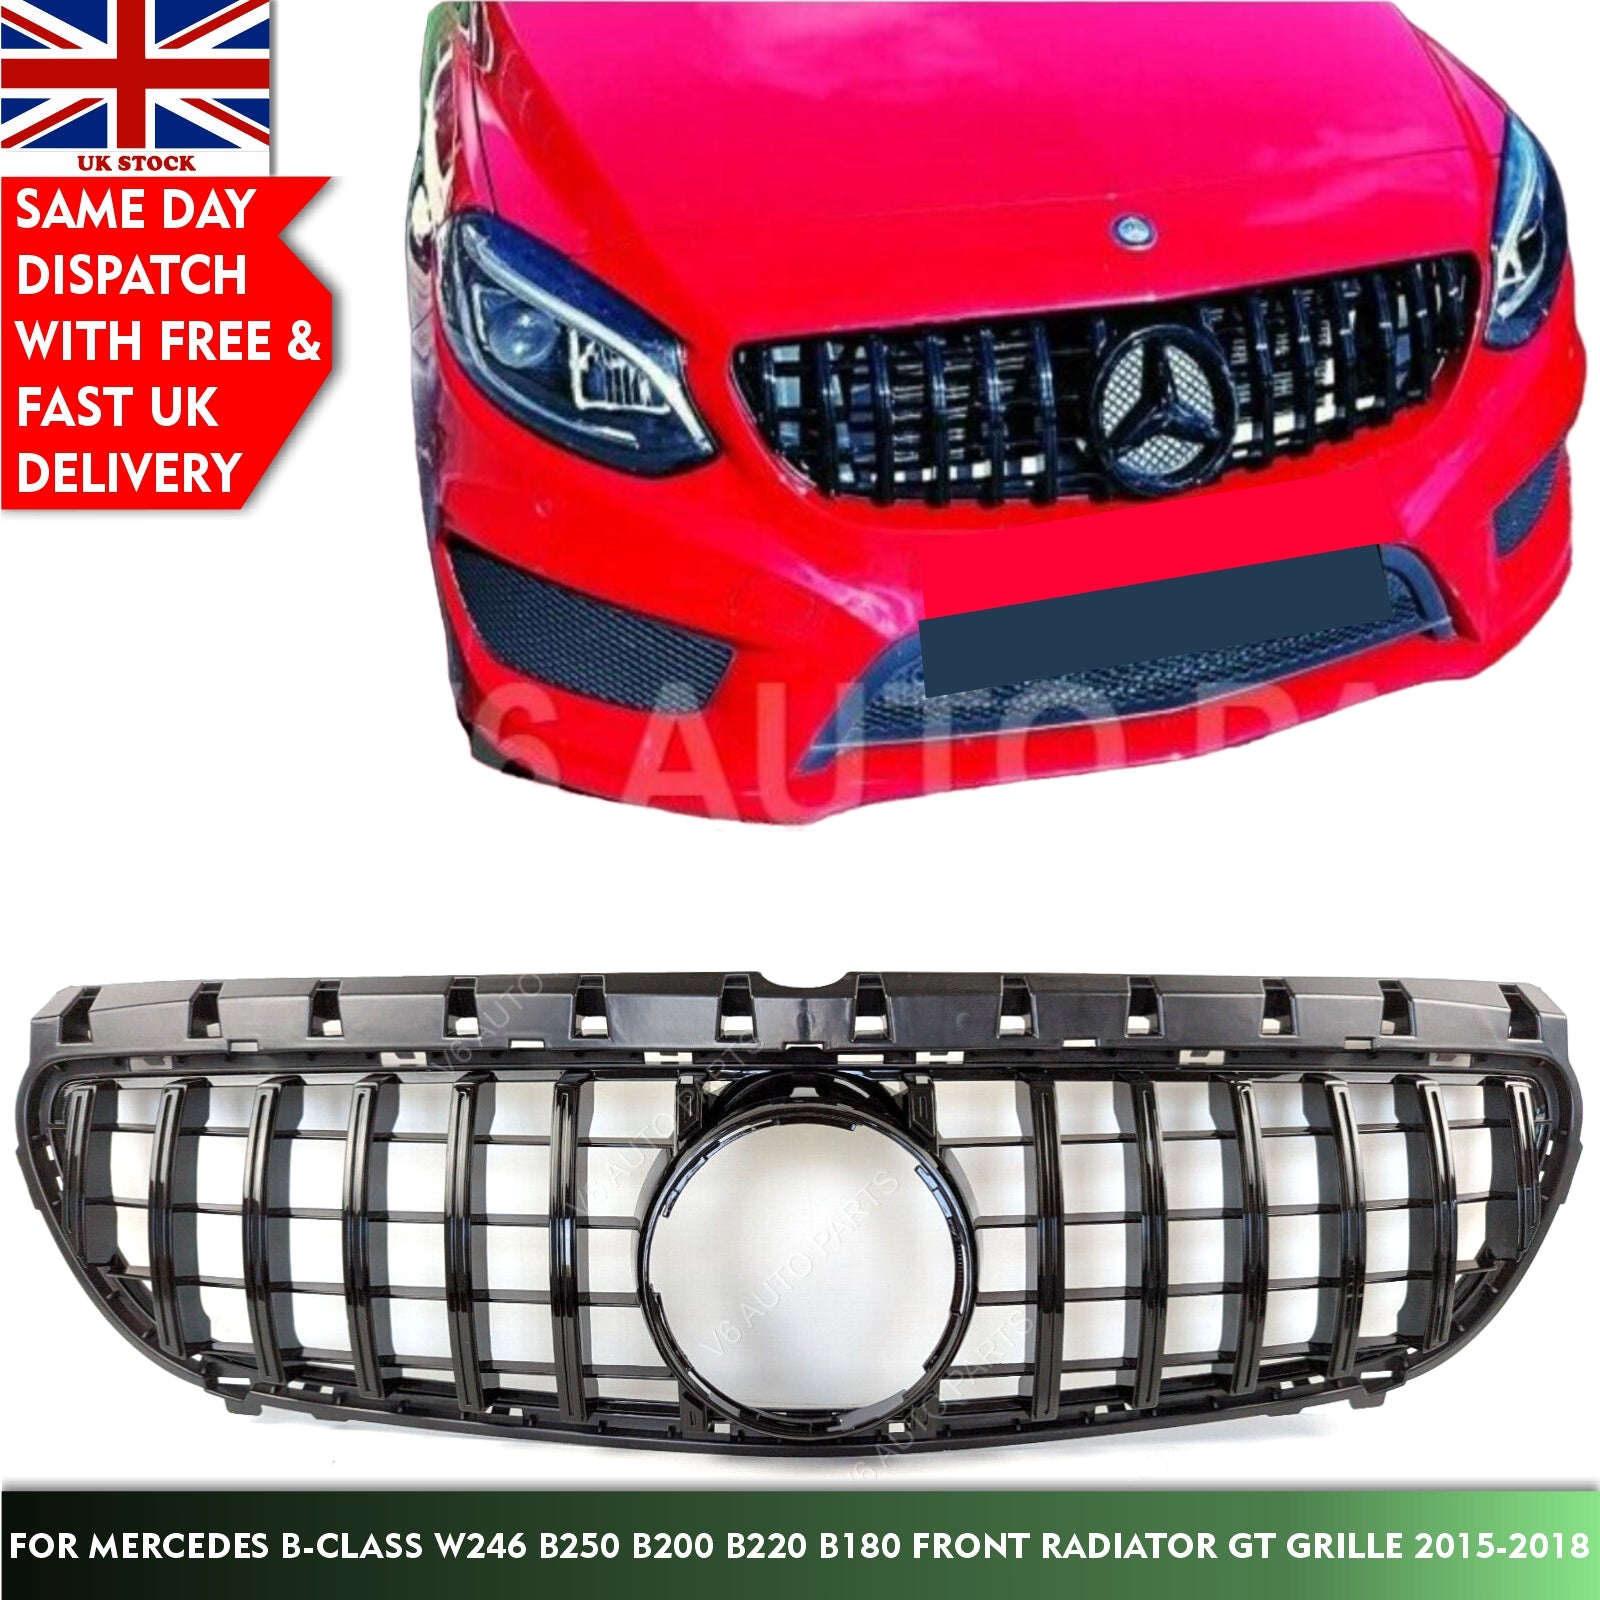 For Mercedes B-Class W246 B220d Front Radiator Black GT Grille Panamericana 2015-18